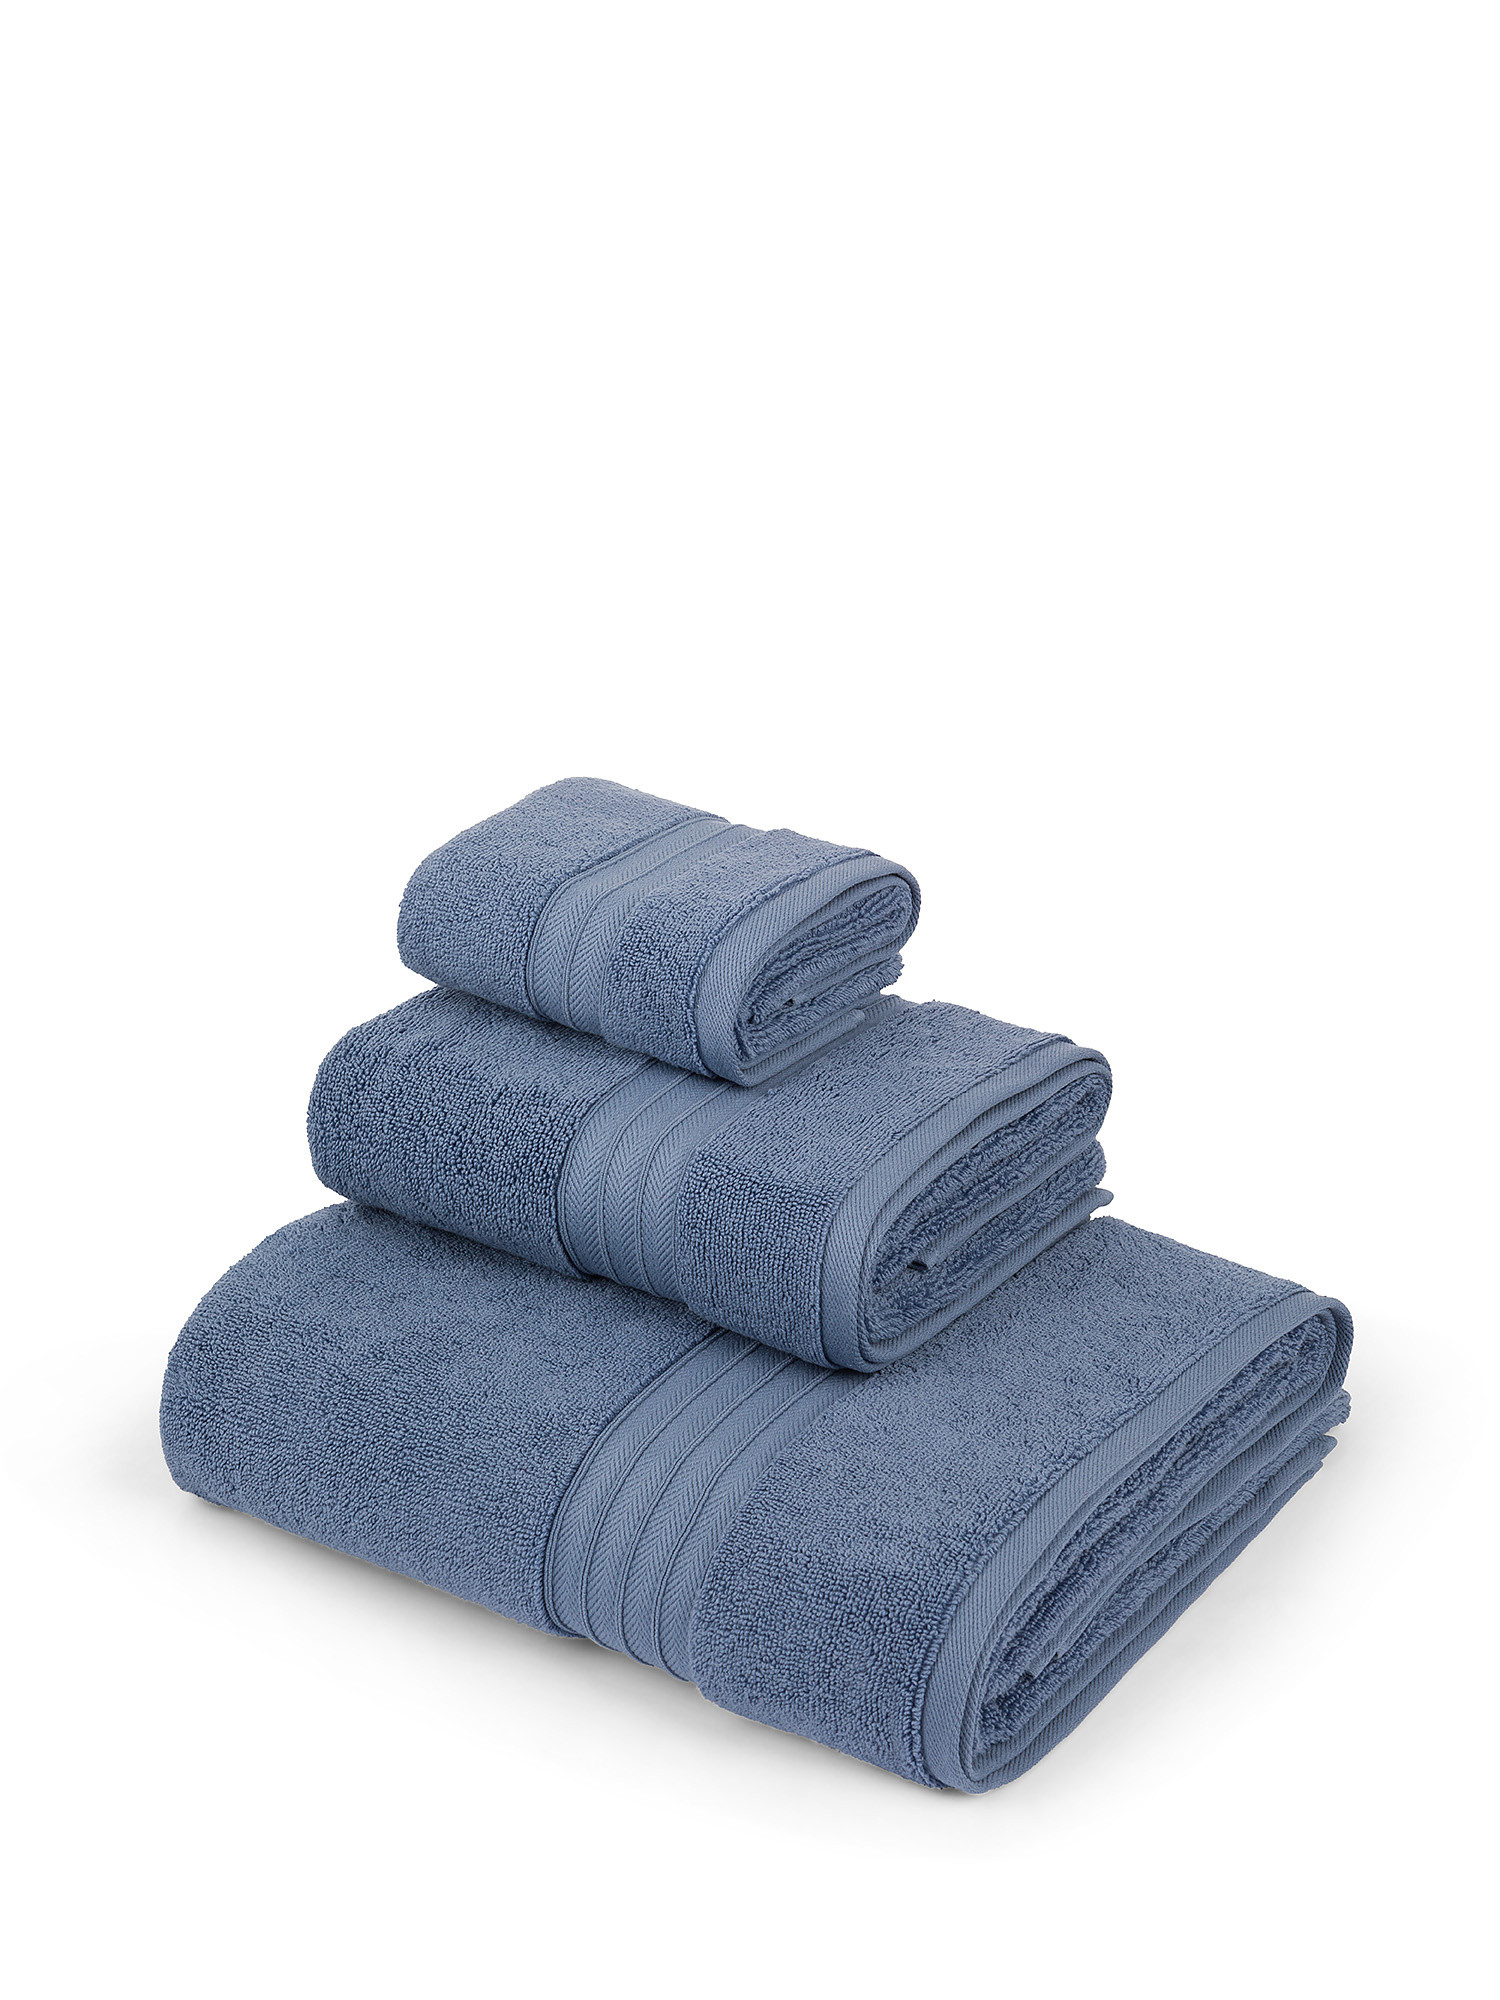 Thermae premium quality cotton towel, Blue, large image number 0